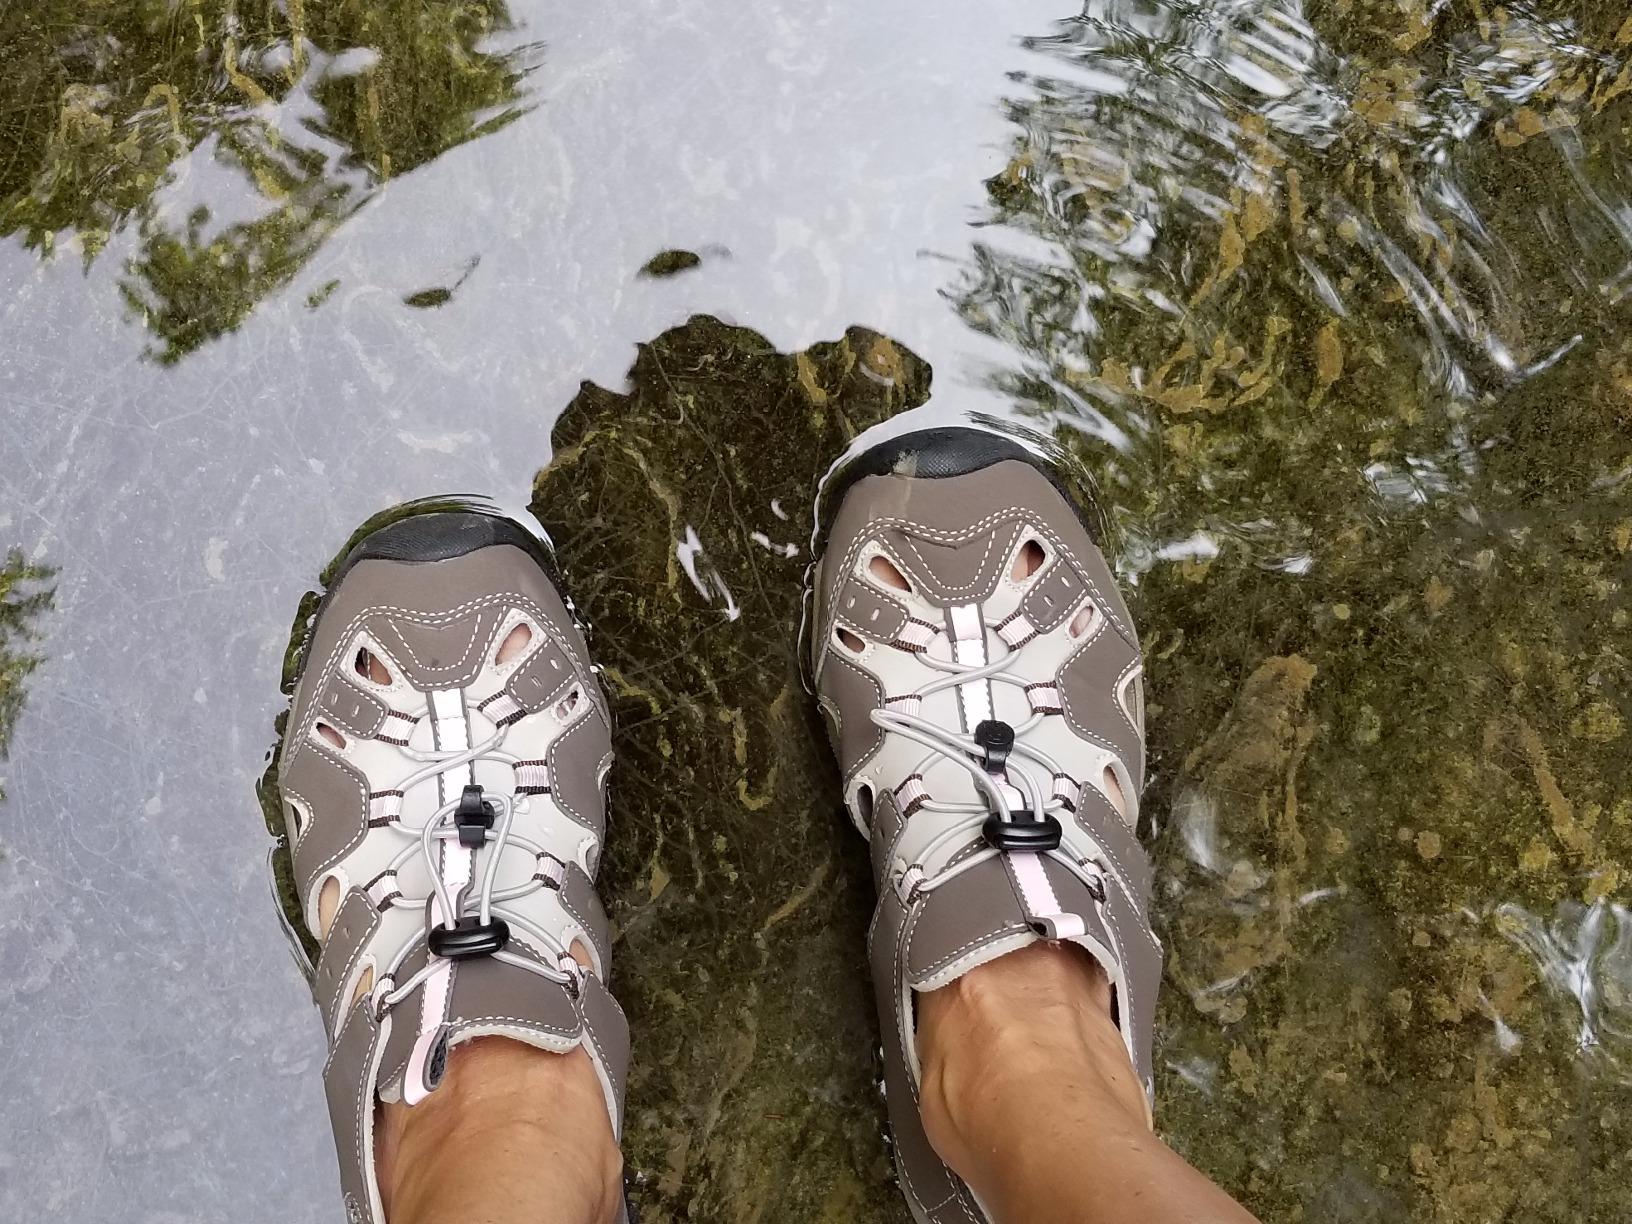 water shoes